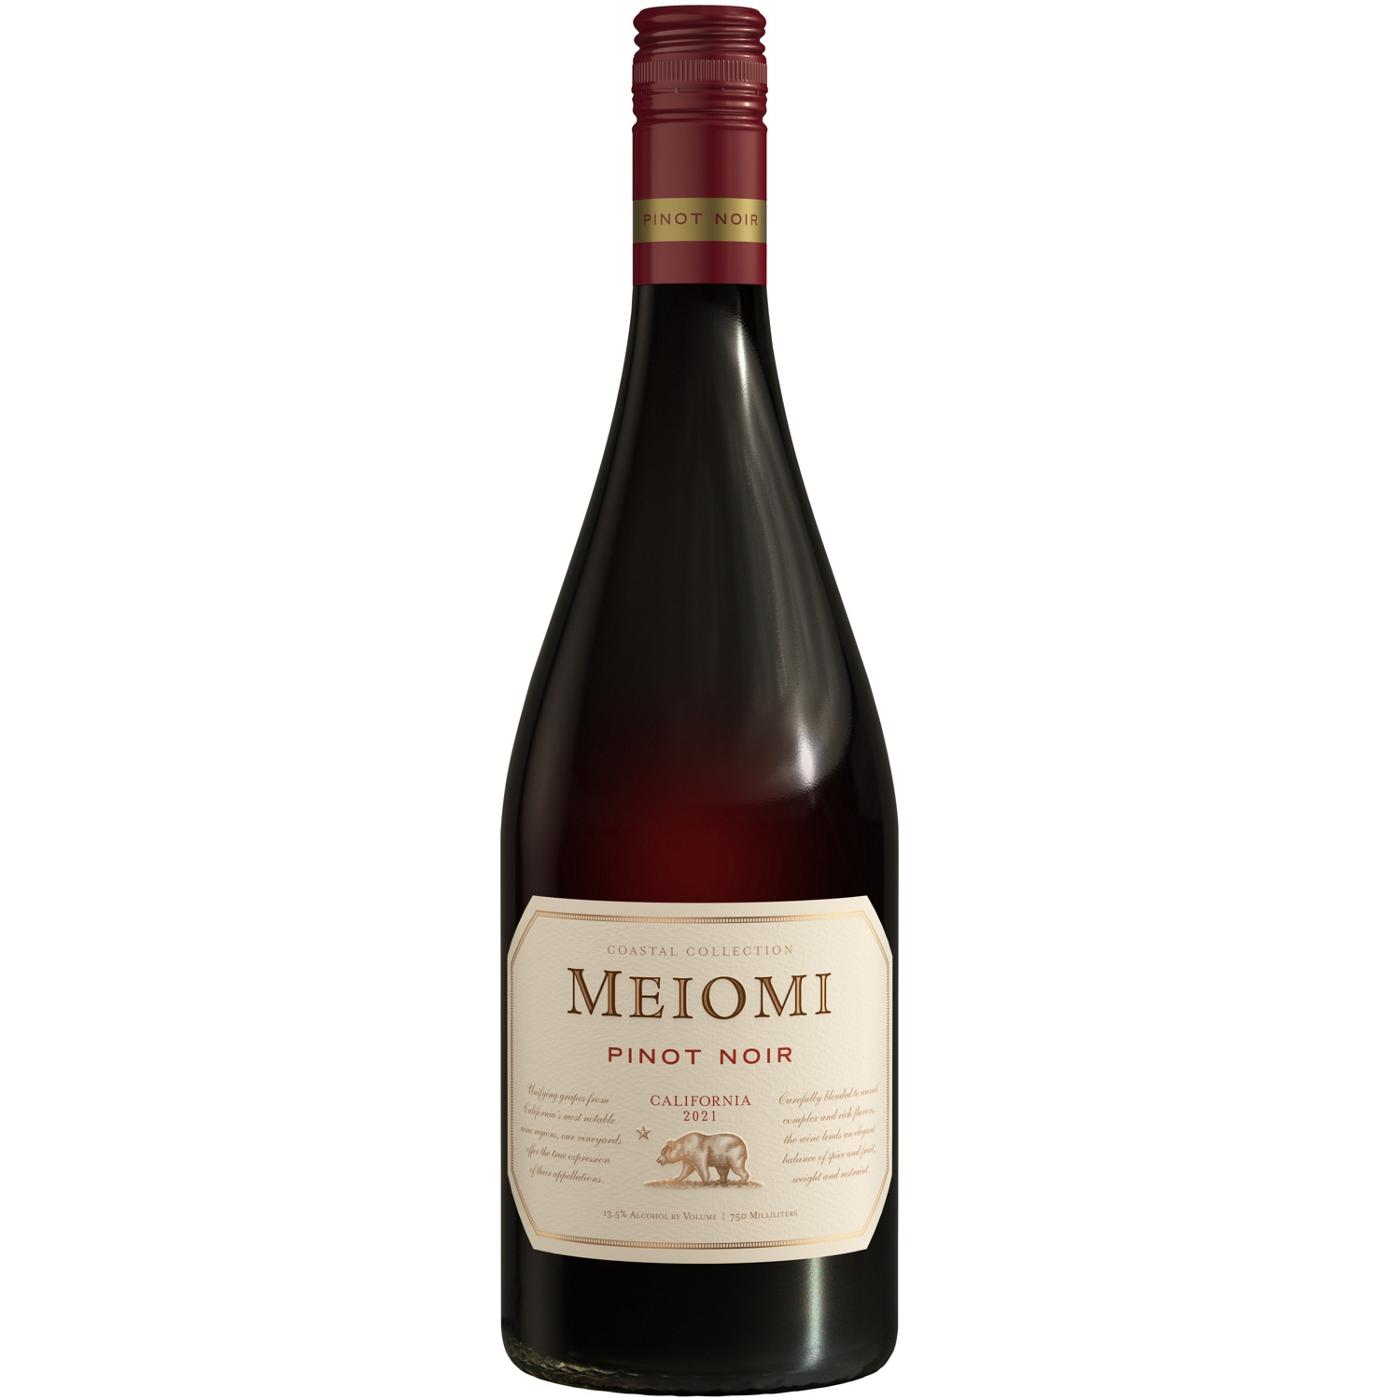 Meiomi Pinot Noir Coastal Collection Red Wine 750 mL Bottle; image 1 of 10